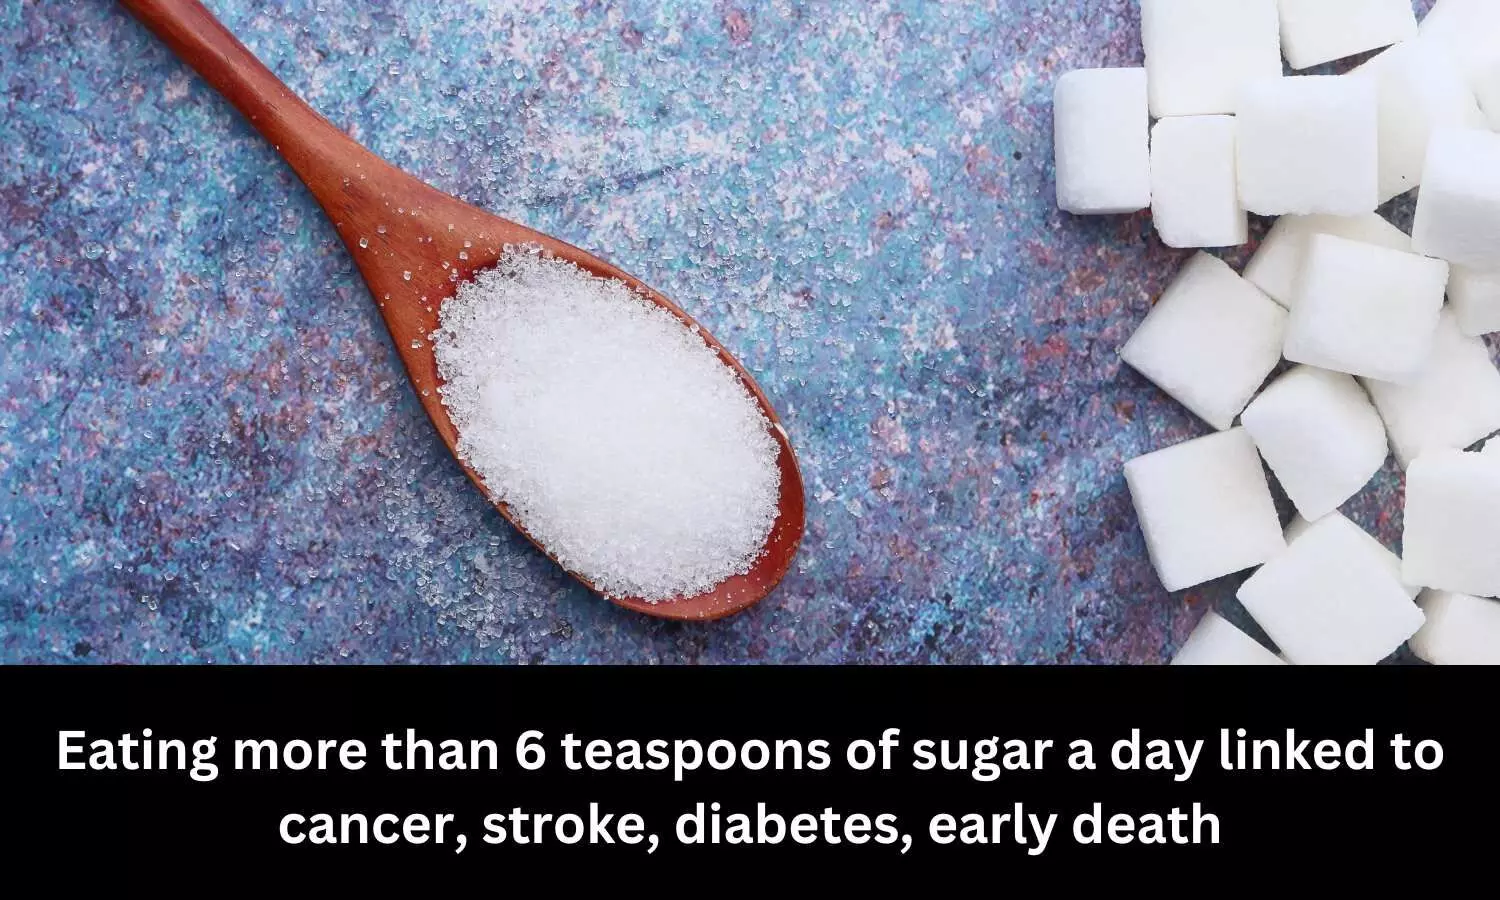 Eating more than 6 teaspoons of sugar a day linked to cancer, stroke, diabetes, early death